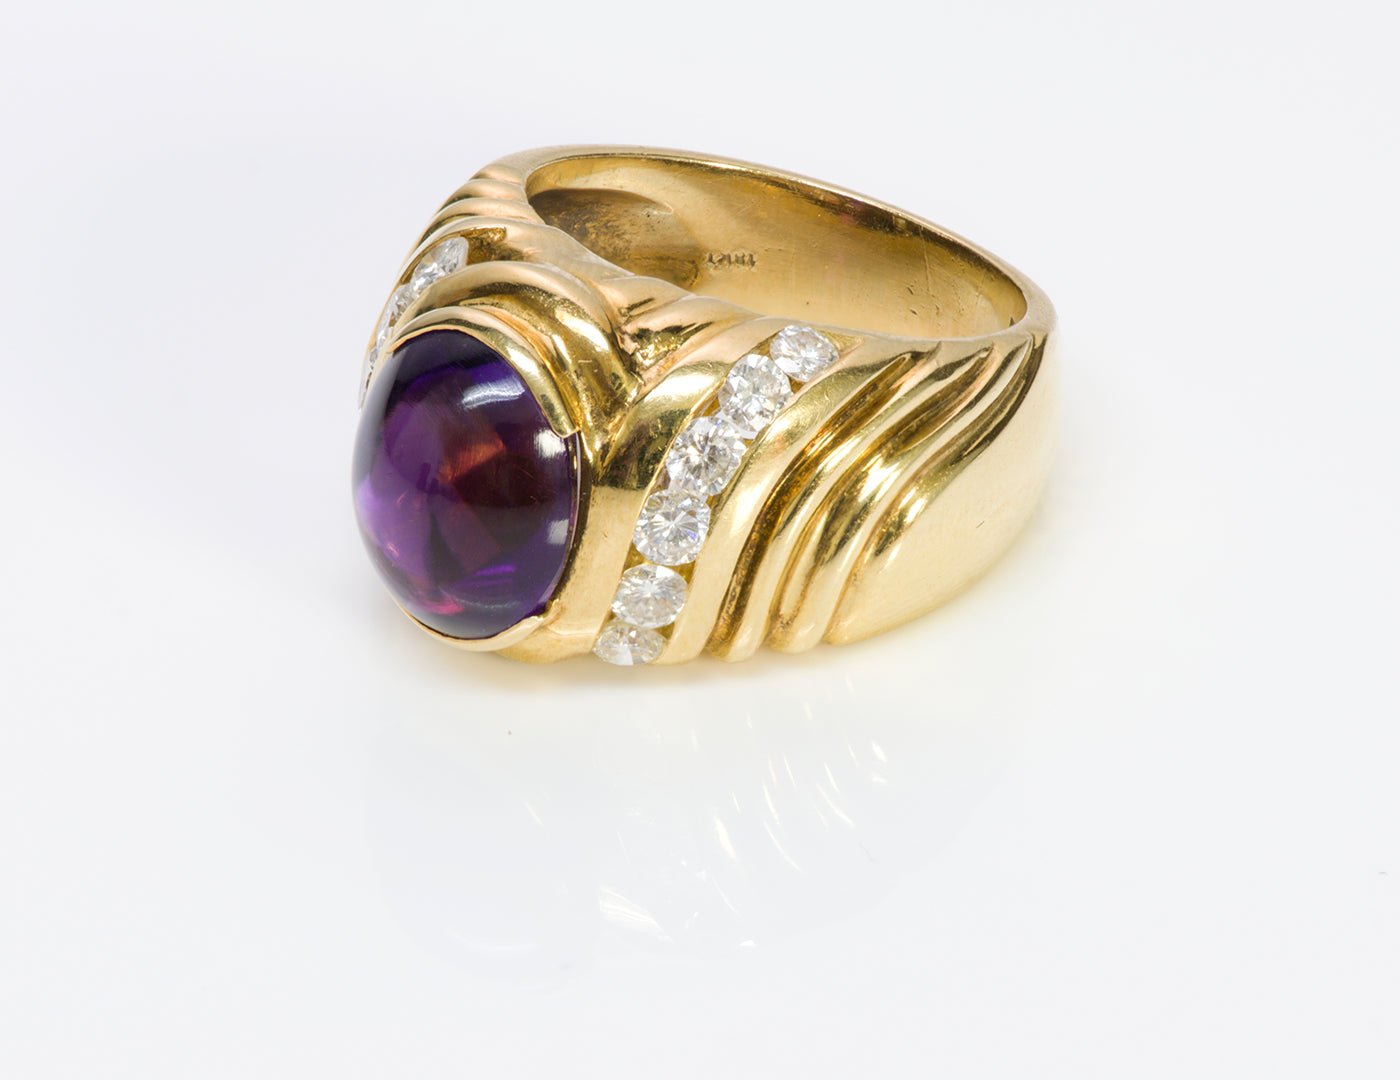 Cabochon Amethyst Diamond 18K Yellow Gold Ring - DSF Antique Jewelry